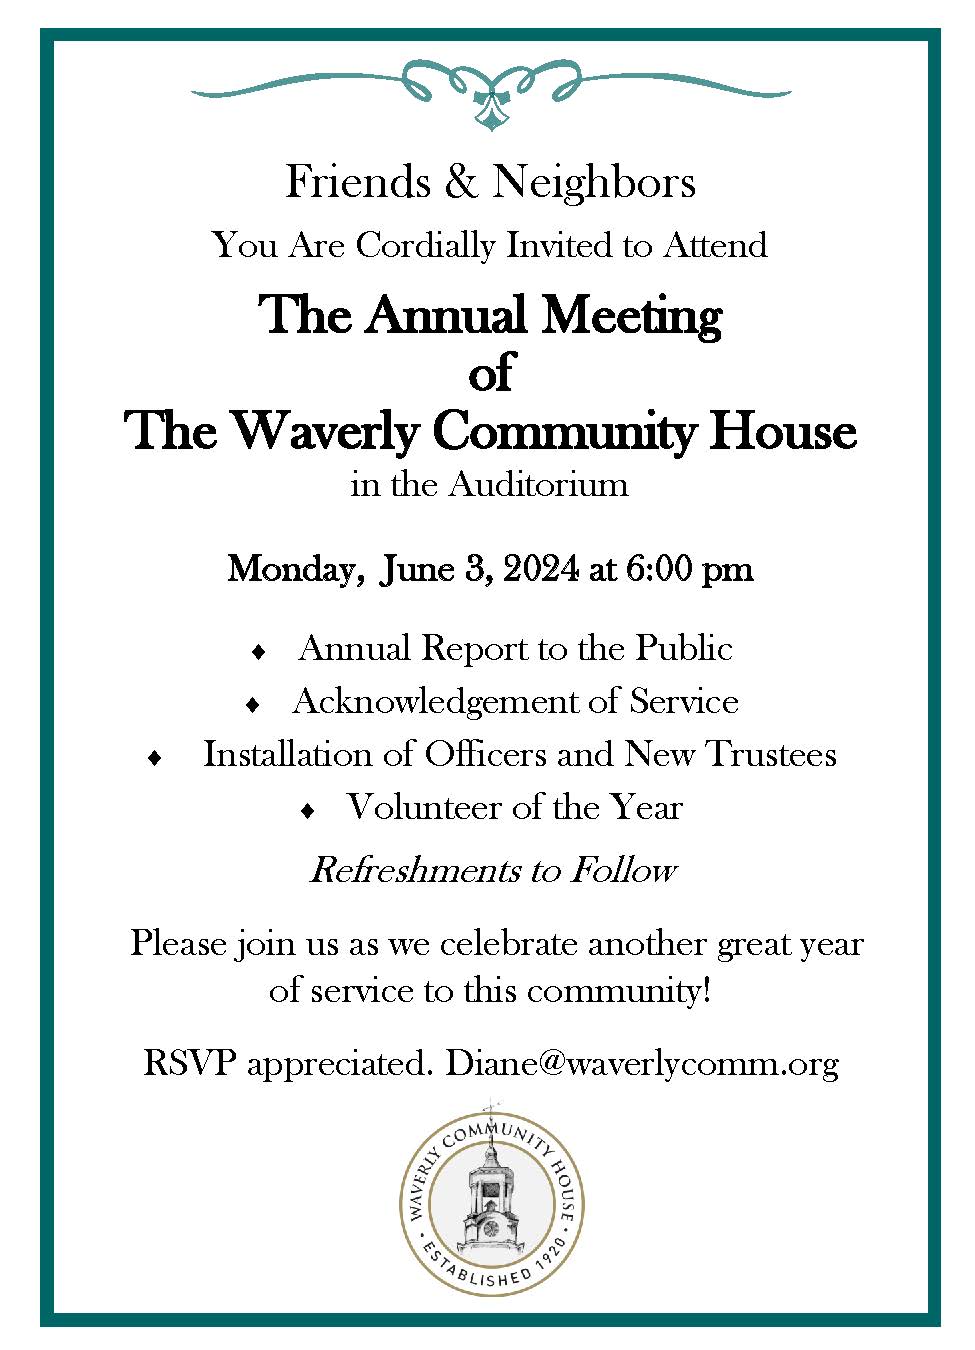 ANNUAL MEETING OF THE WAVERLY COMMUNITY HOUSE